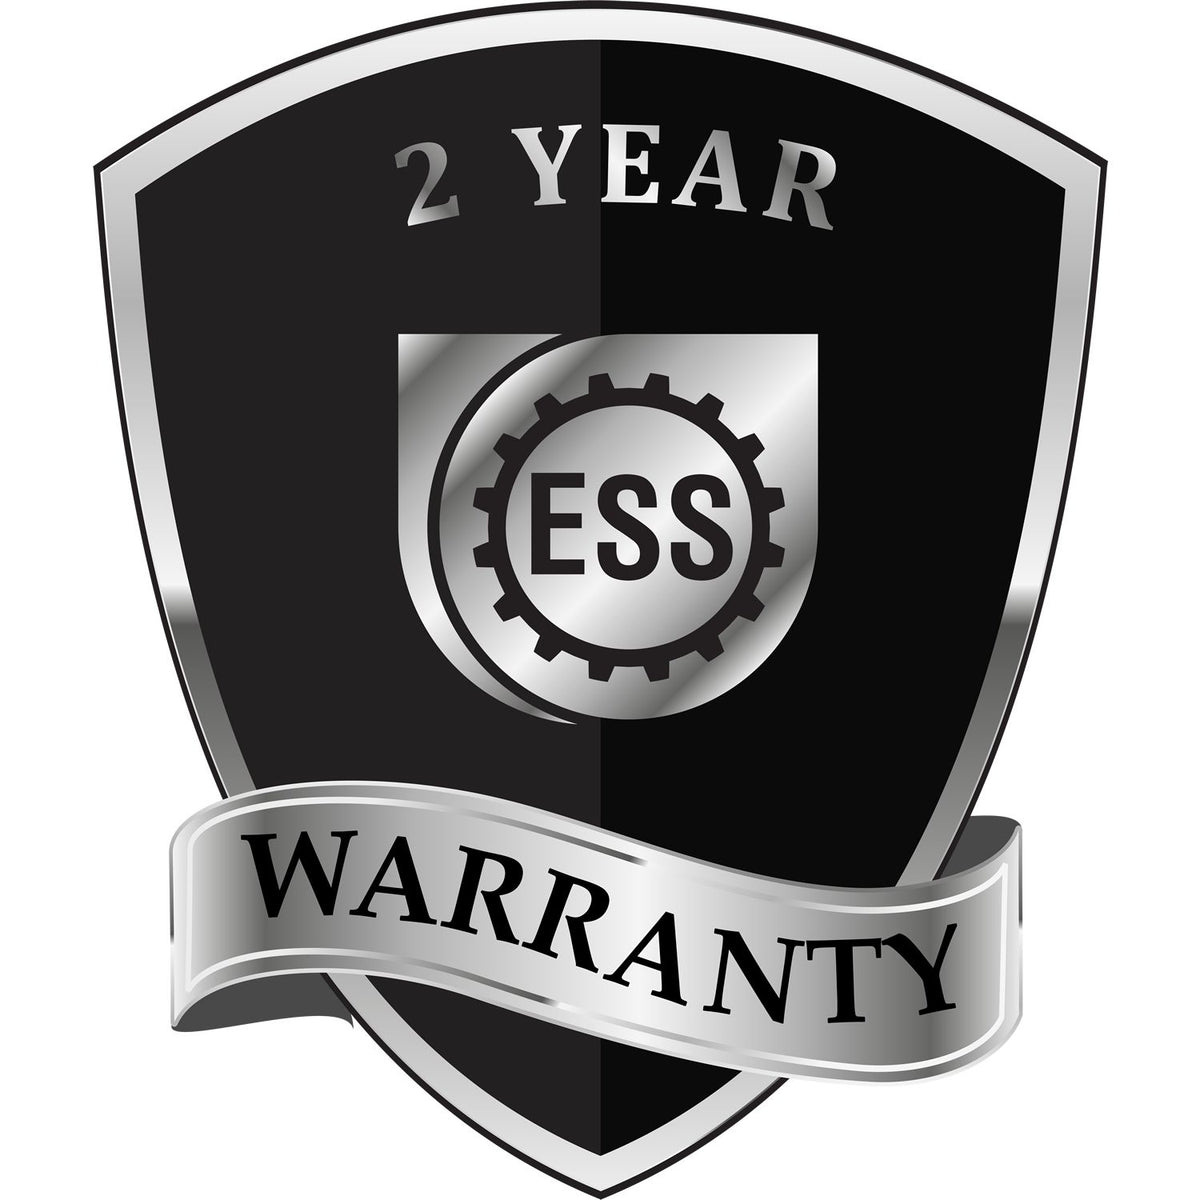 A black and silver badge or emblem showing warranty information for the Soft Oregon Professional Geologist Seal